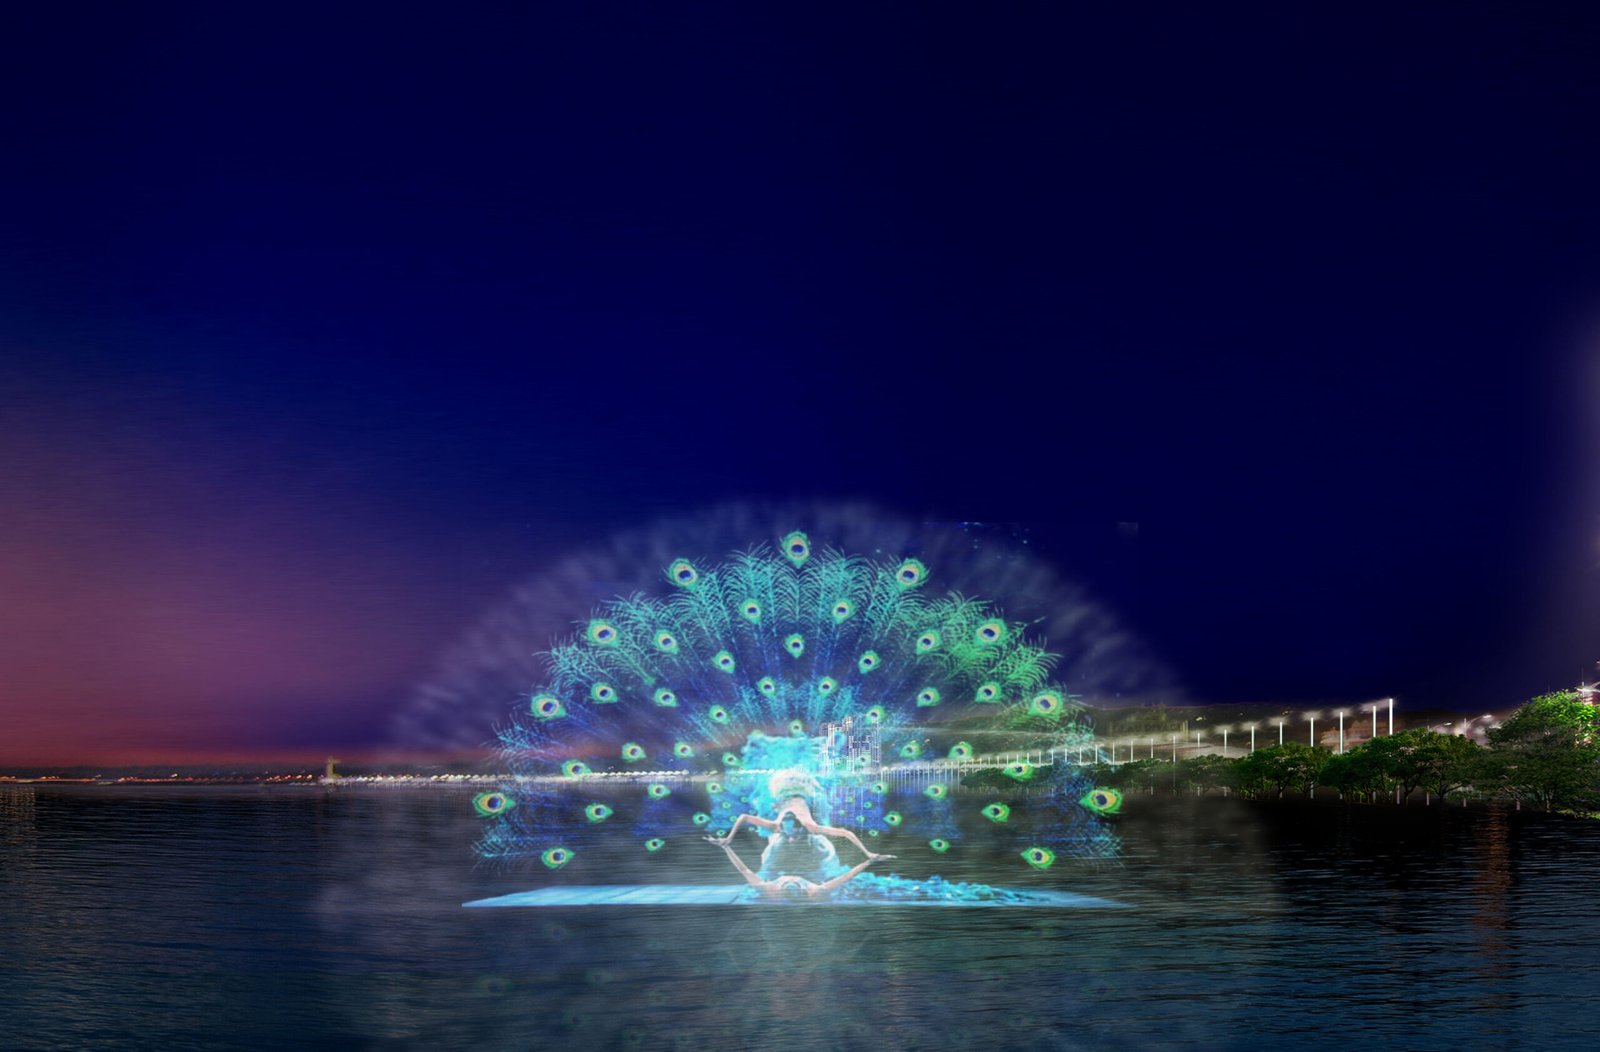 The Water Screen Projection Fountain in Malaysia